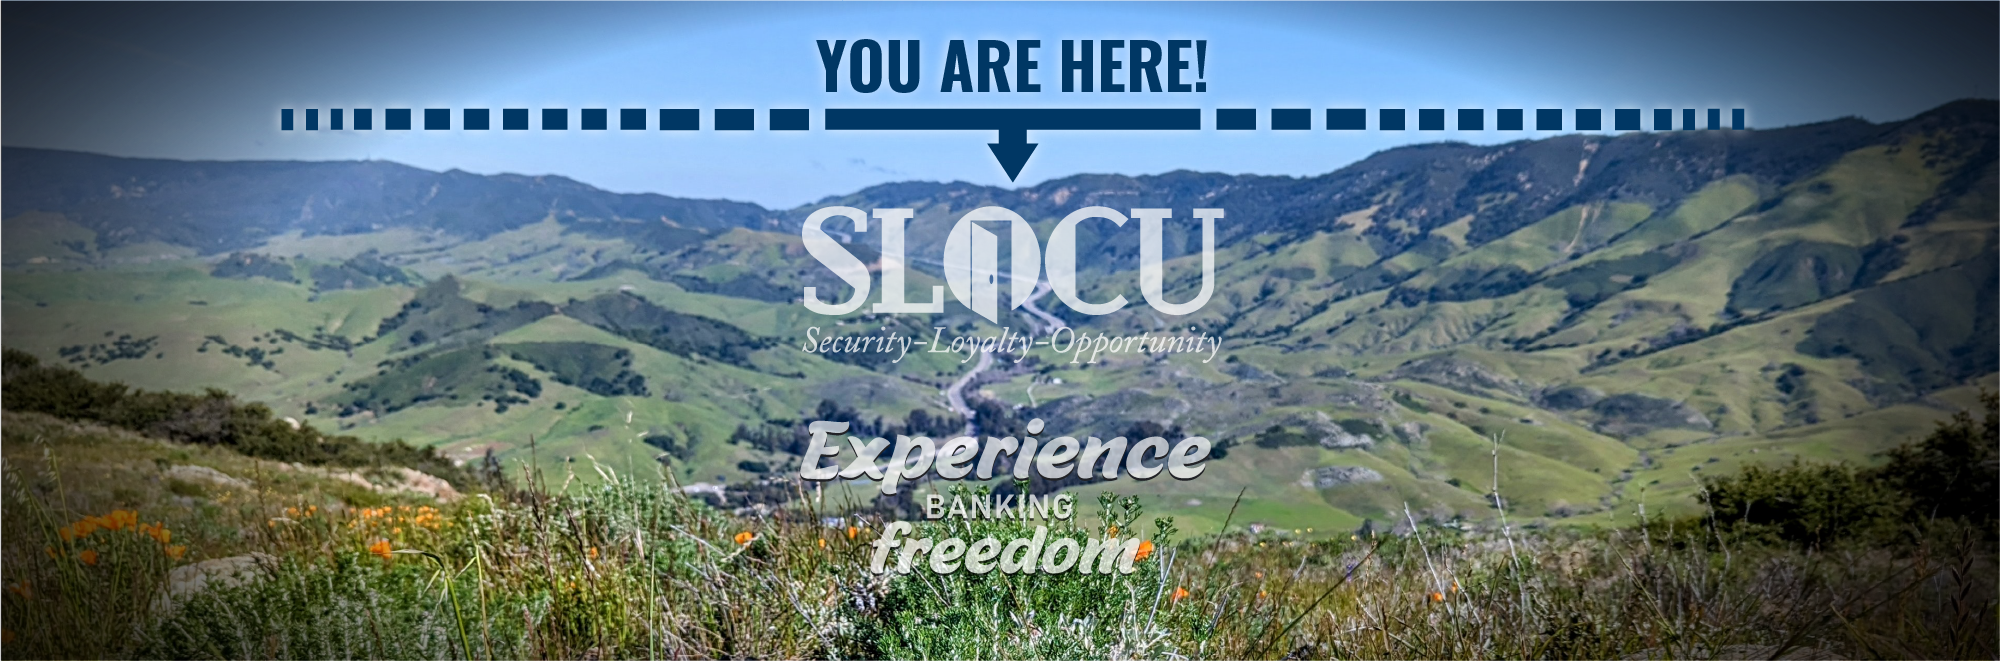 You Are Here! Experience Banking Freedom. SLO Credit Union.